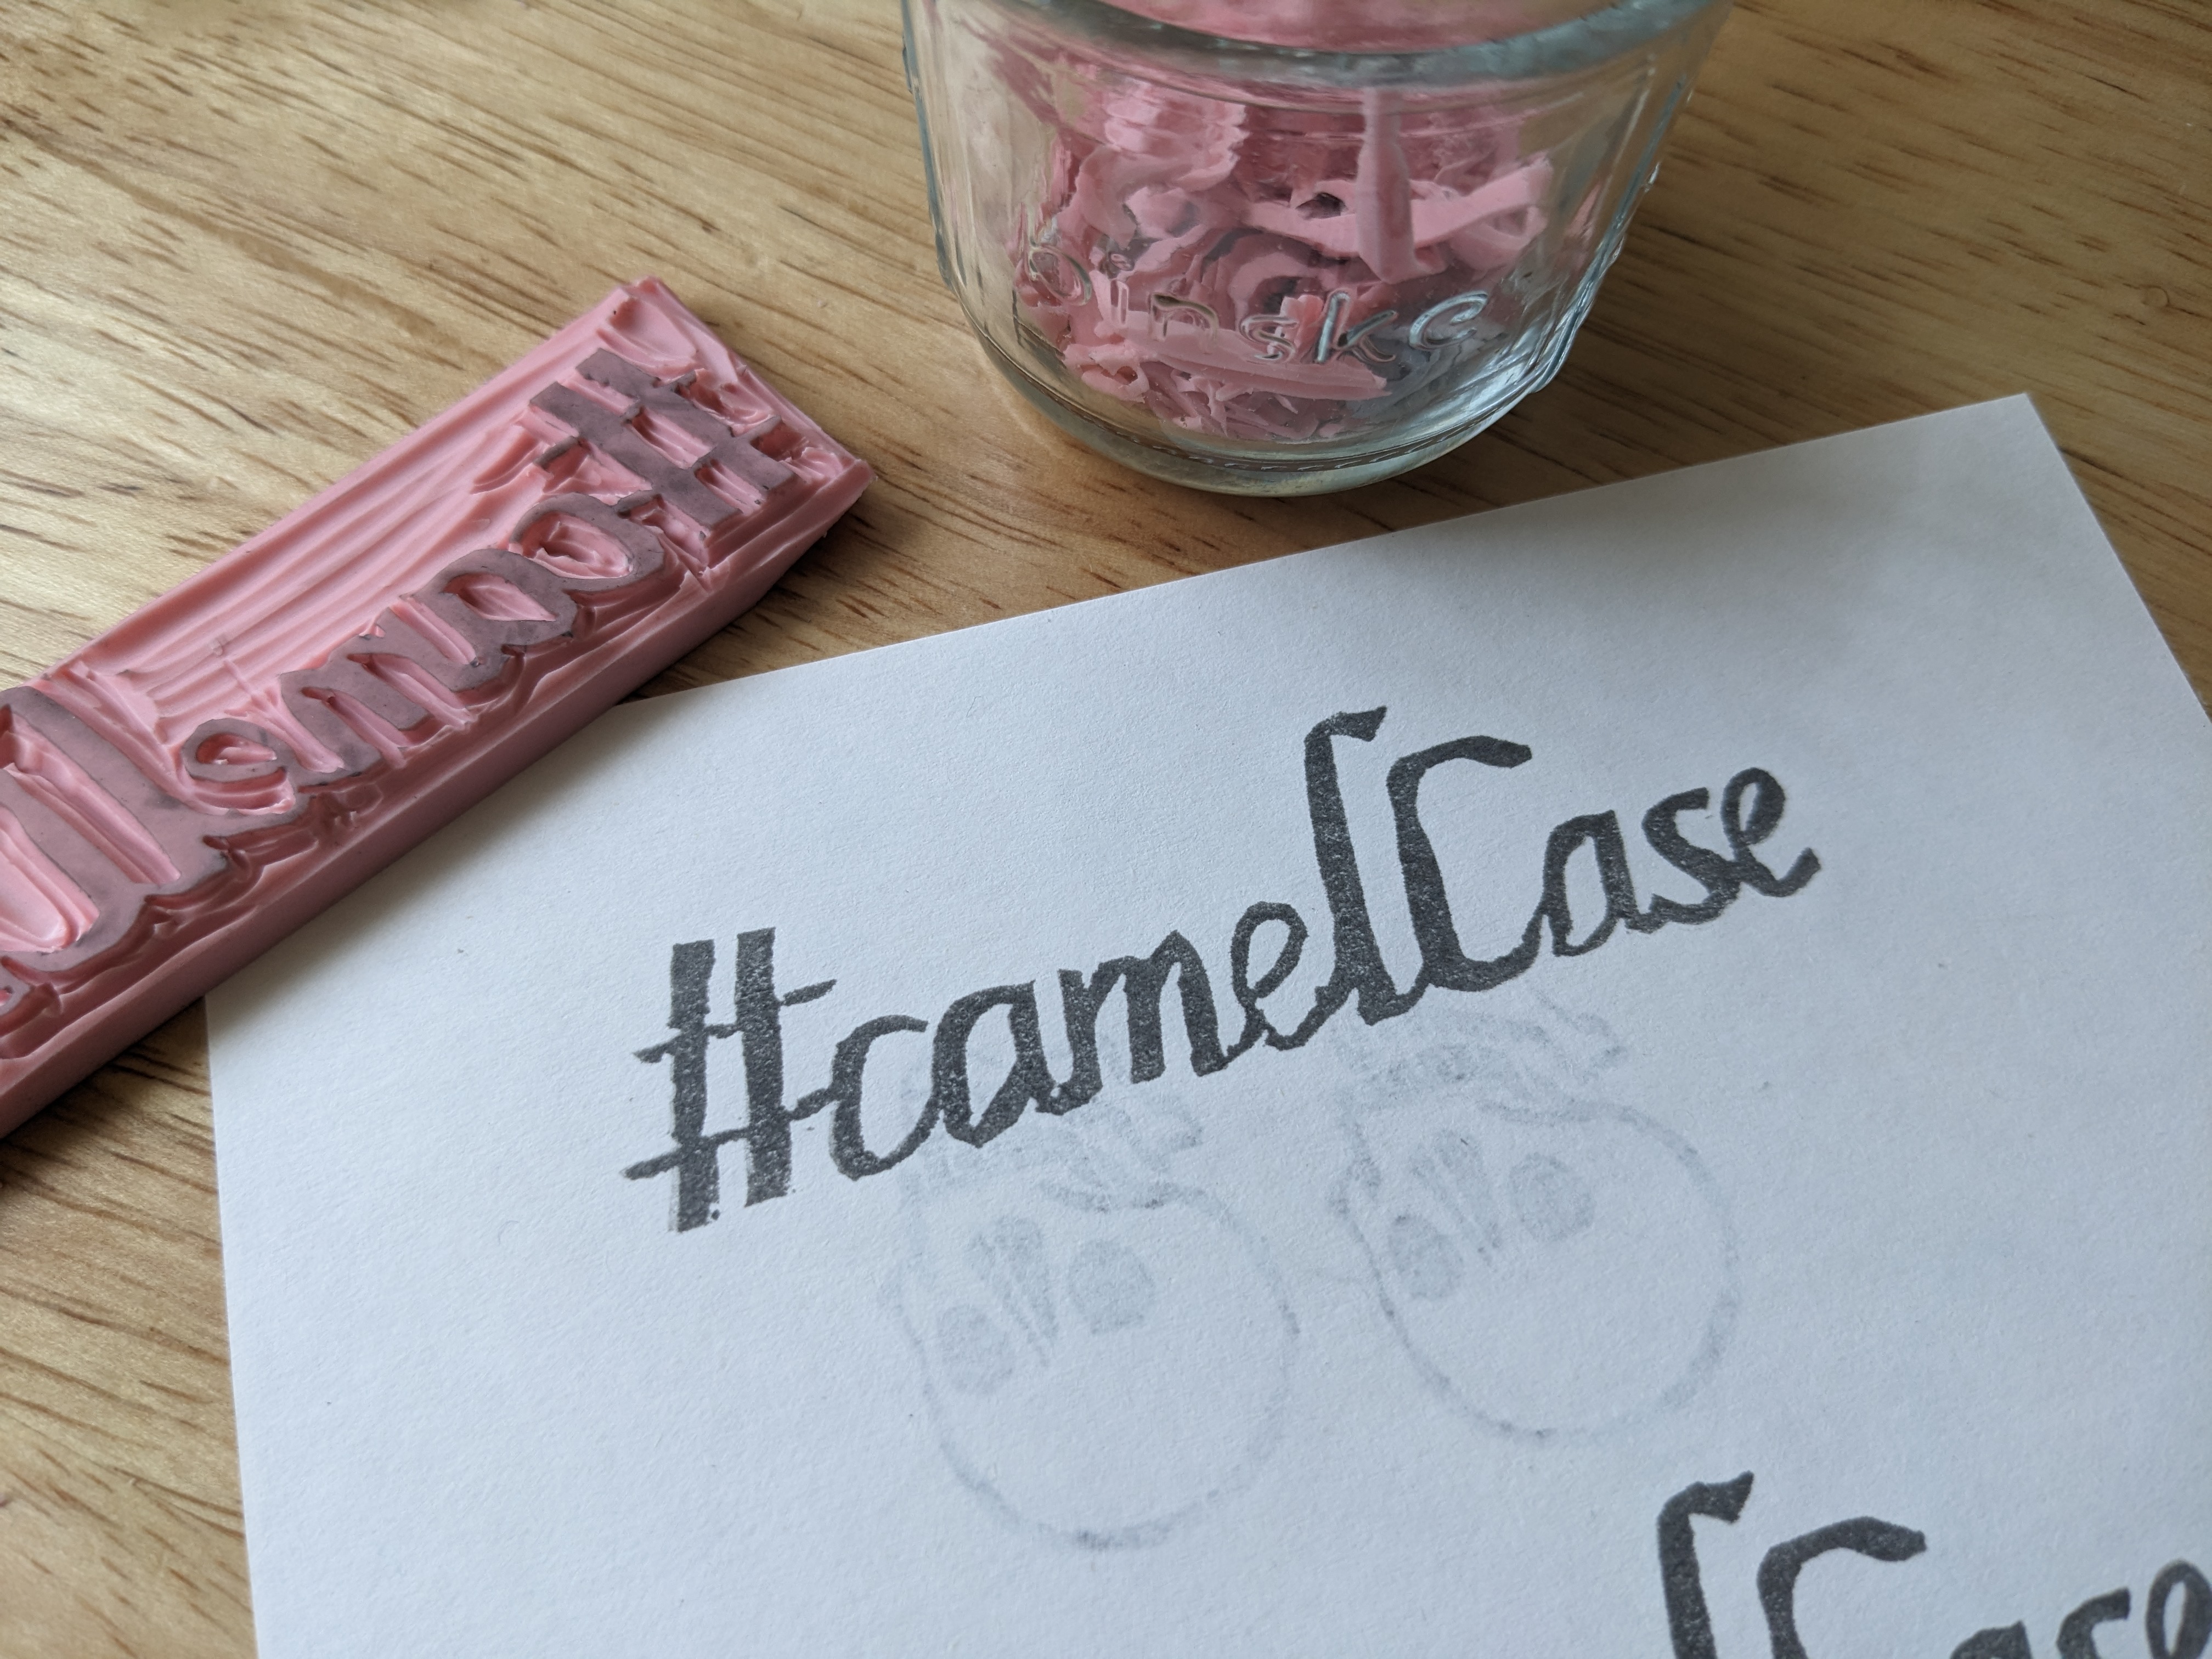 A carved stamp next to its print. The print reads '#camelCase' in a slightly formal-looking italic font.